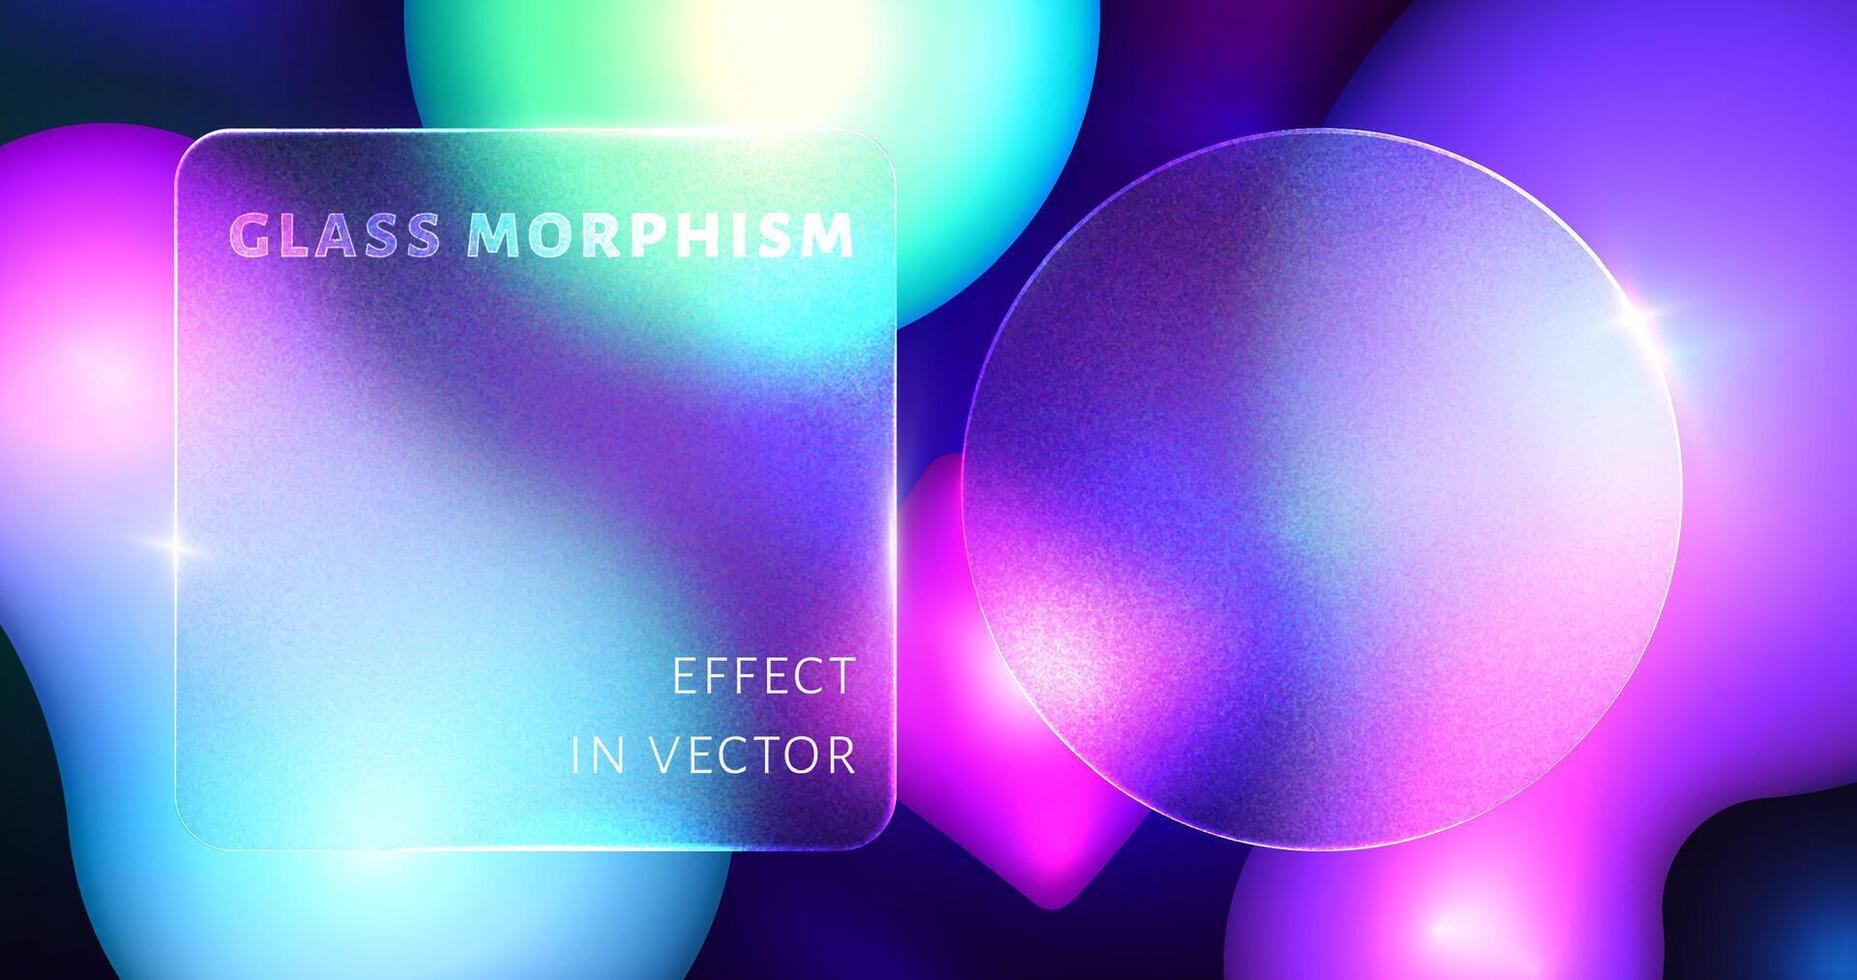 Glassmorphism effect with transparent card on fluid gradient. Glass morphism on neon blur futuristic purple background. Frosted acrylic, mate plexiglass plates in rectangle and circle shape. vector